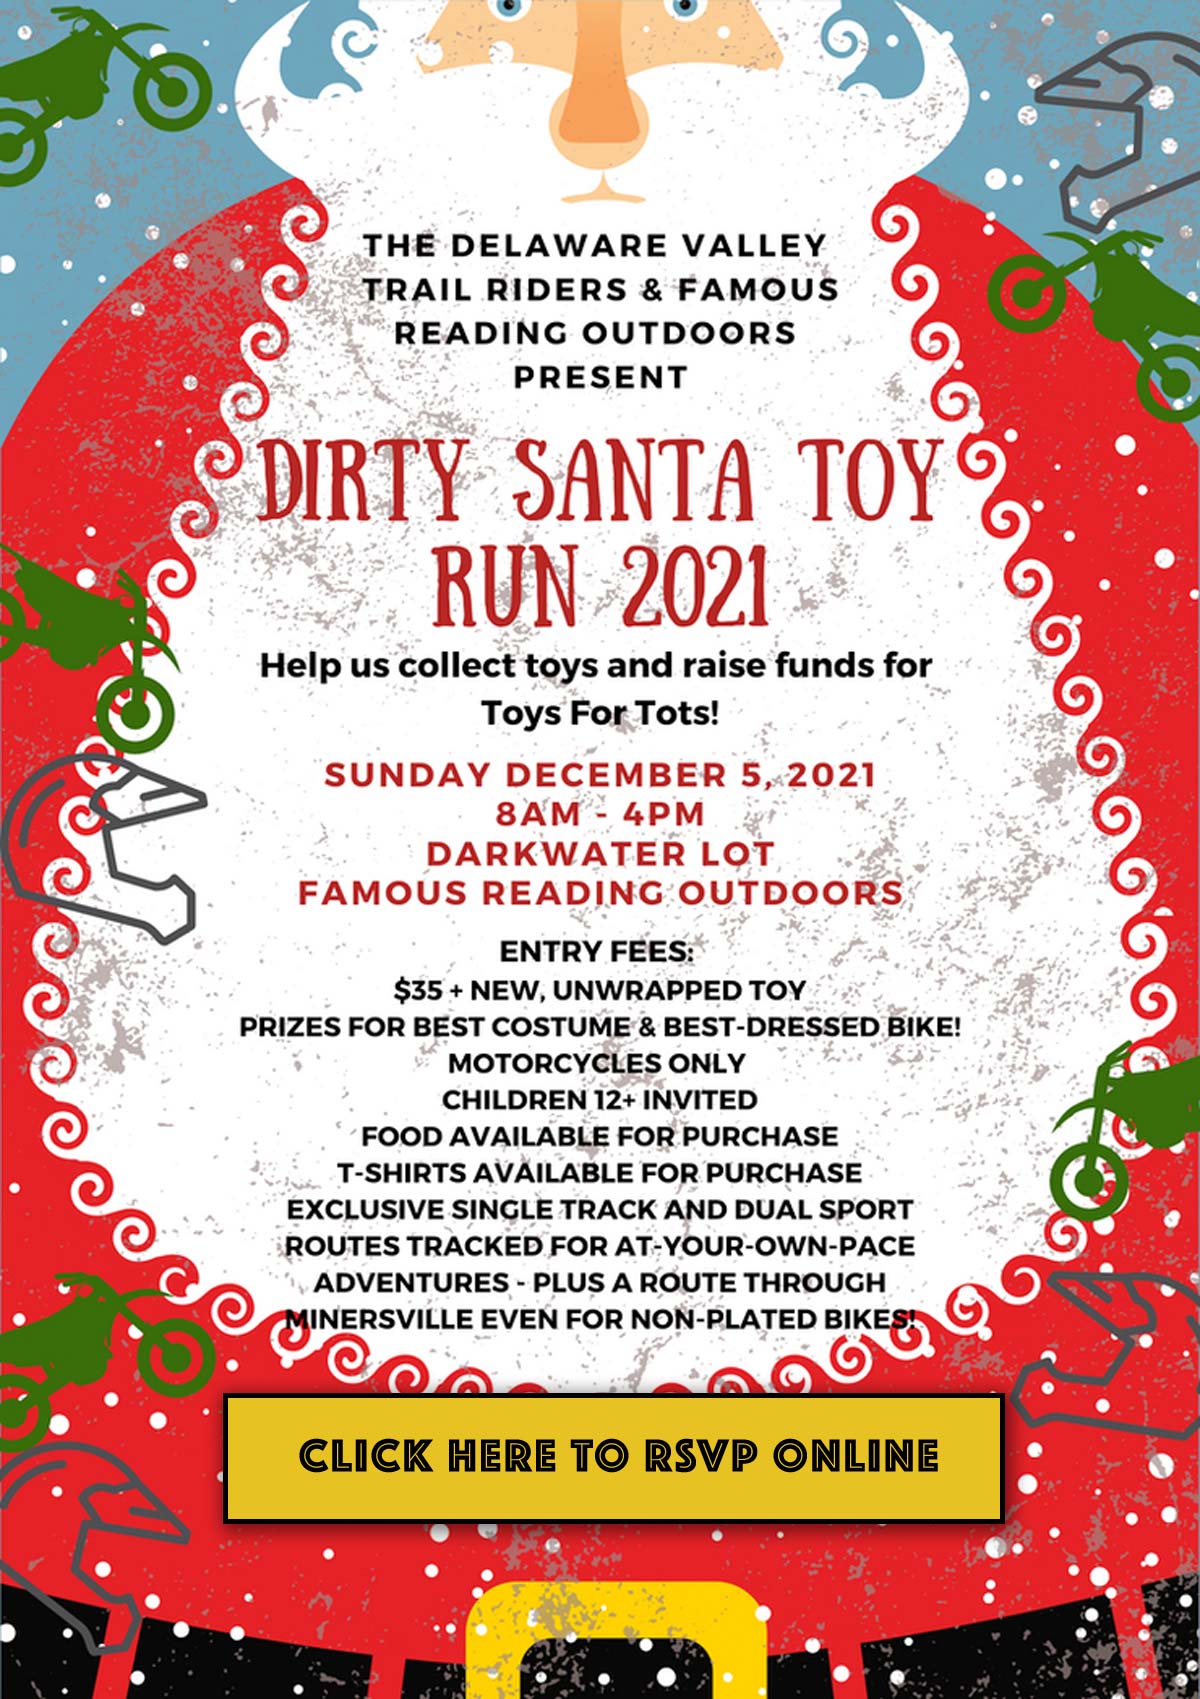 Dirty Santa Toys-For-Tots Toy Run to benefit the children of St. Clair, PA |Sponsored by Famous Reading Outdoors and Del Val Trail Riders